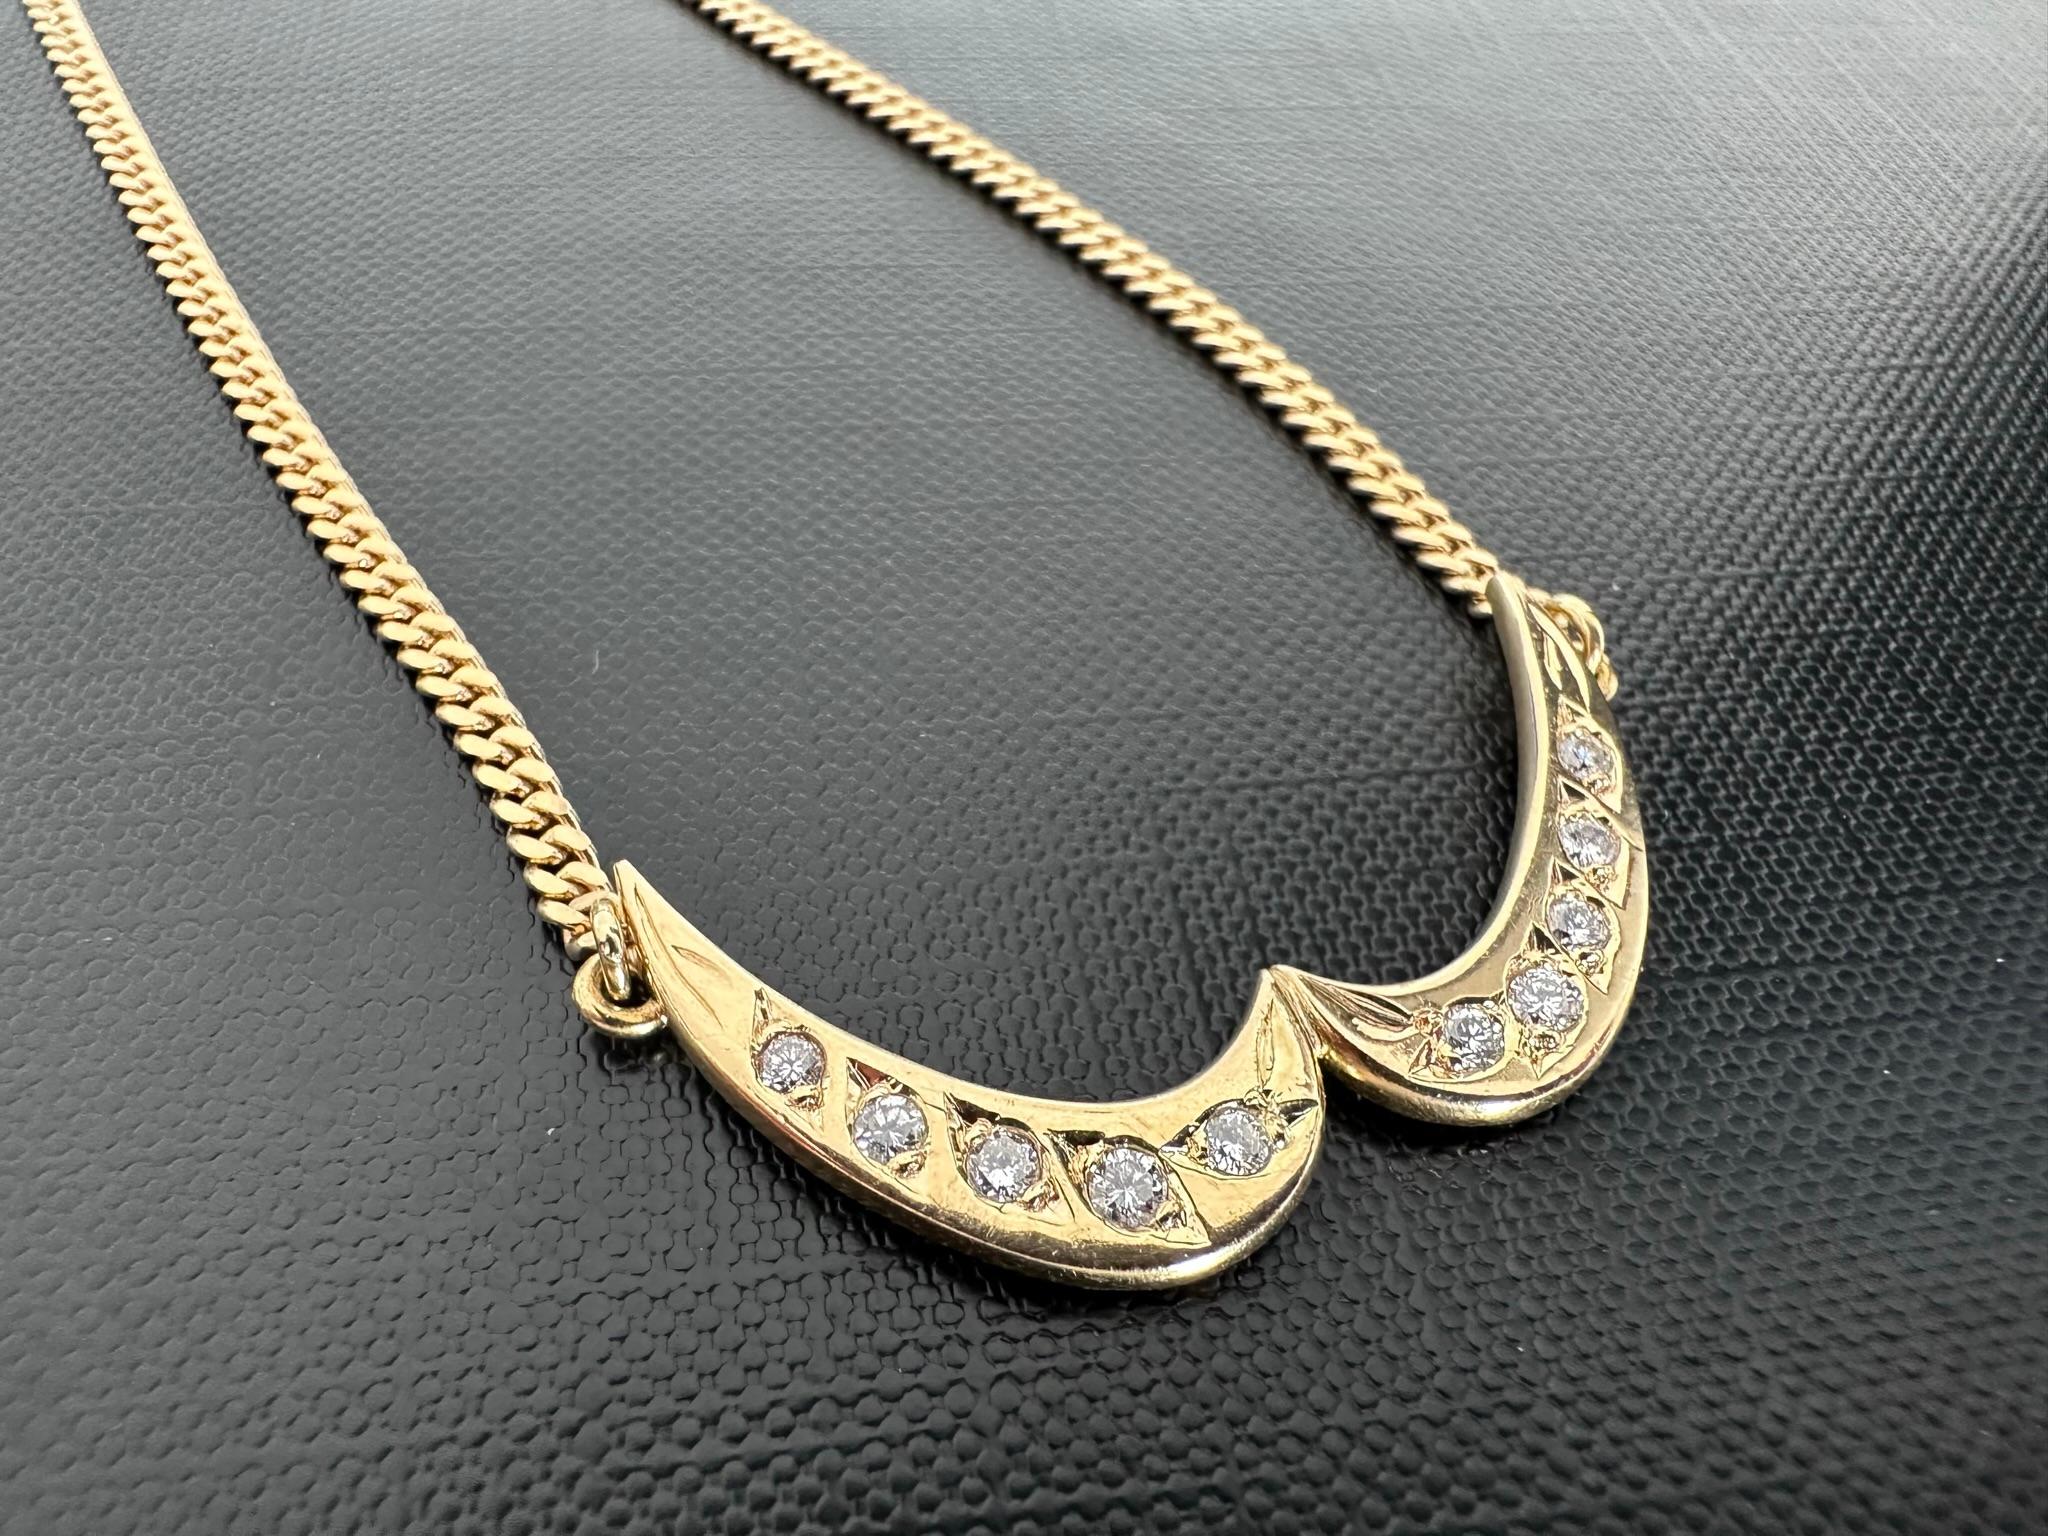 Women's or Men's Vintage Collar Shape Necklace 18kt Yellow Gold with Diamonds For Sale